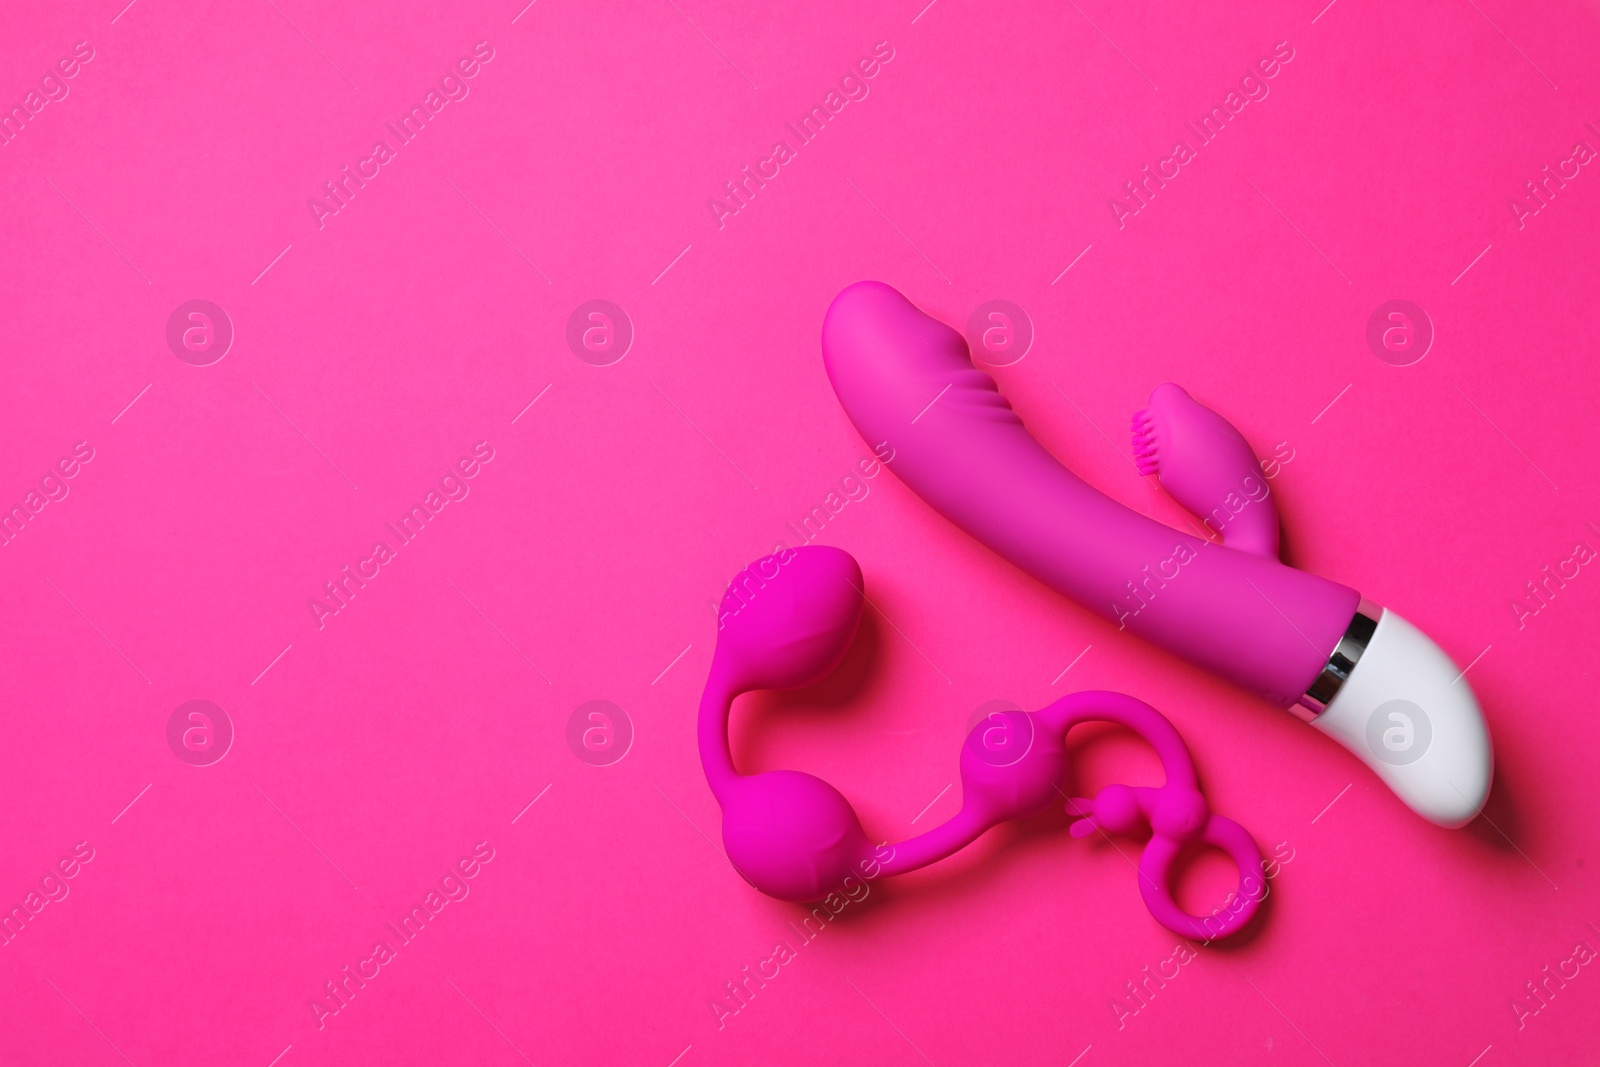 Photo of Anal balls and dildo on pink background, flat lay with space for text. Sex toy